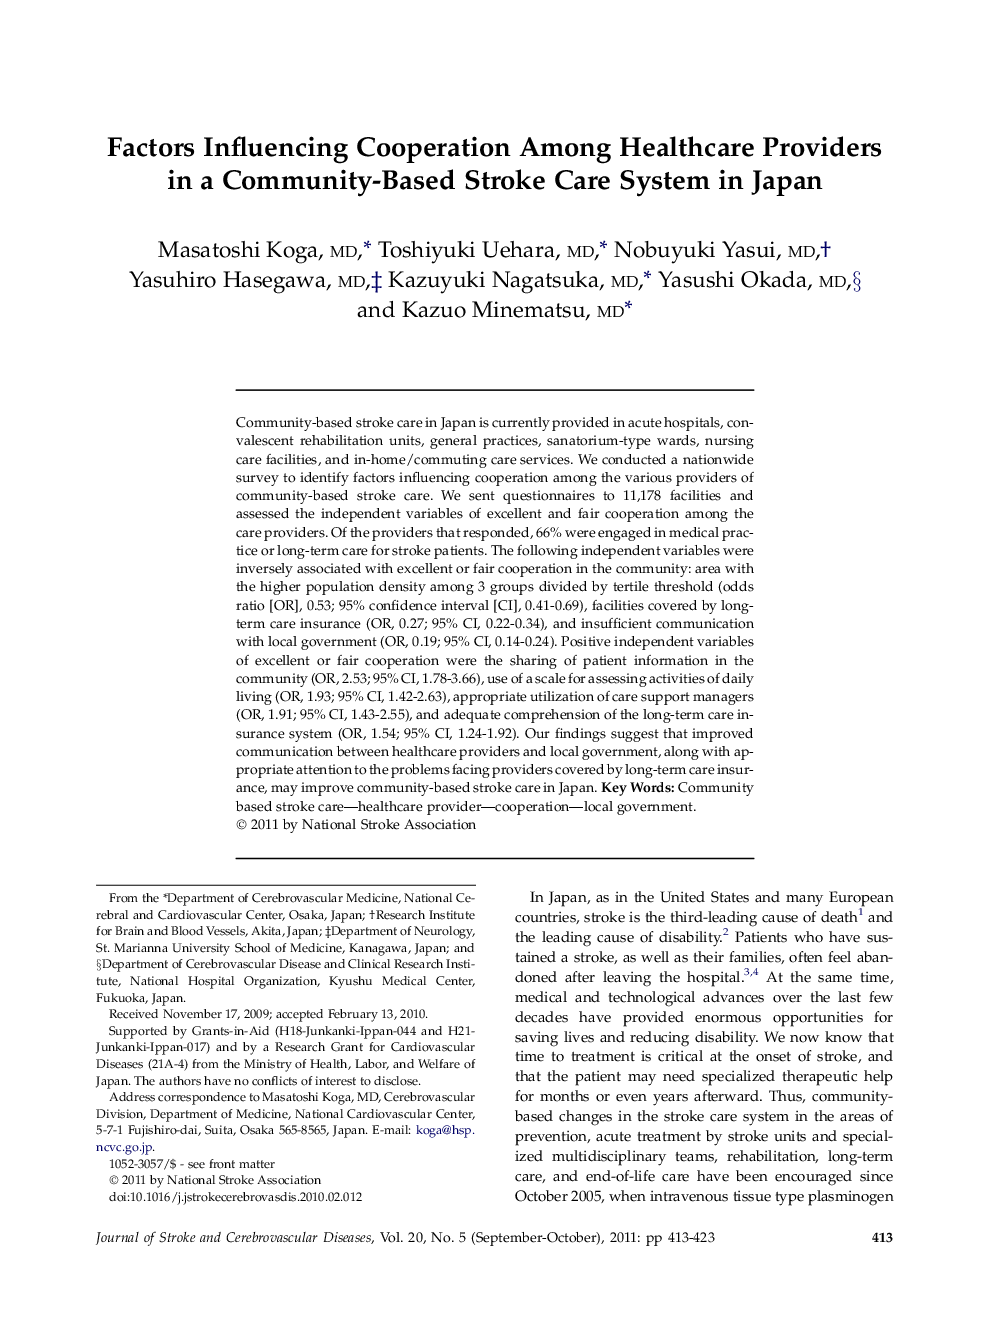 Factors Influencing Cooperation Among Healthcare Providers in a Community-Based Stroke Care System in Japan 